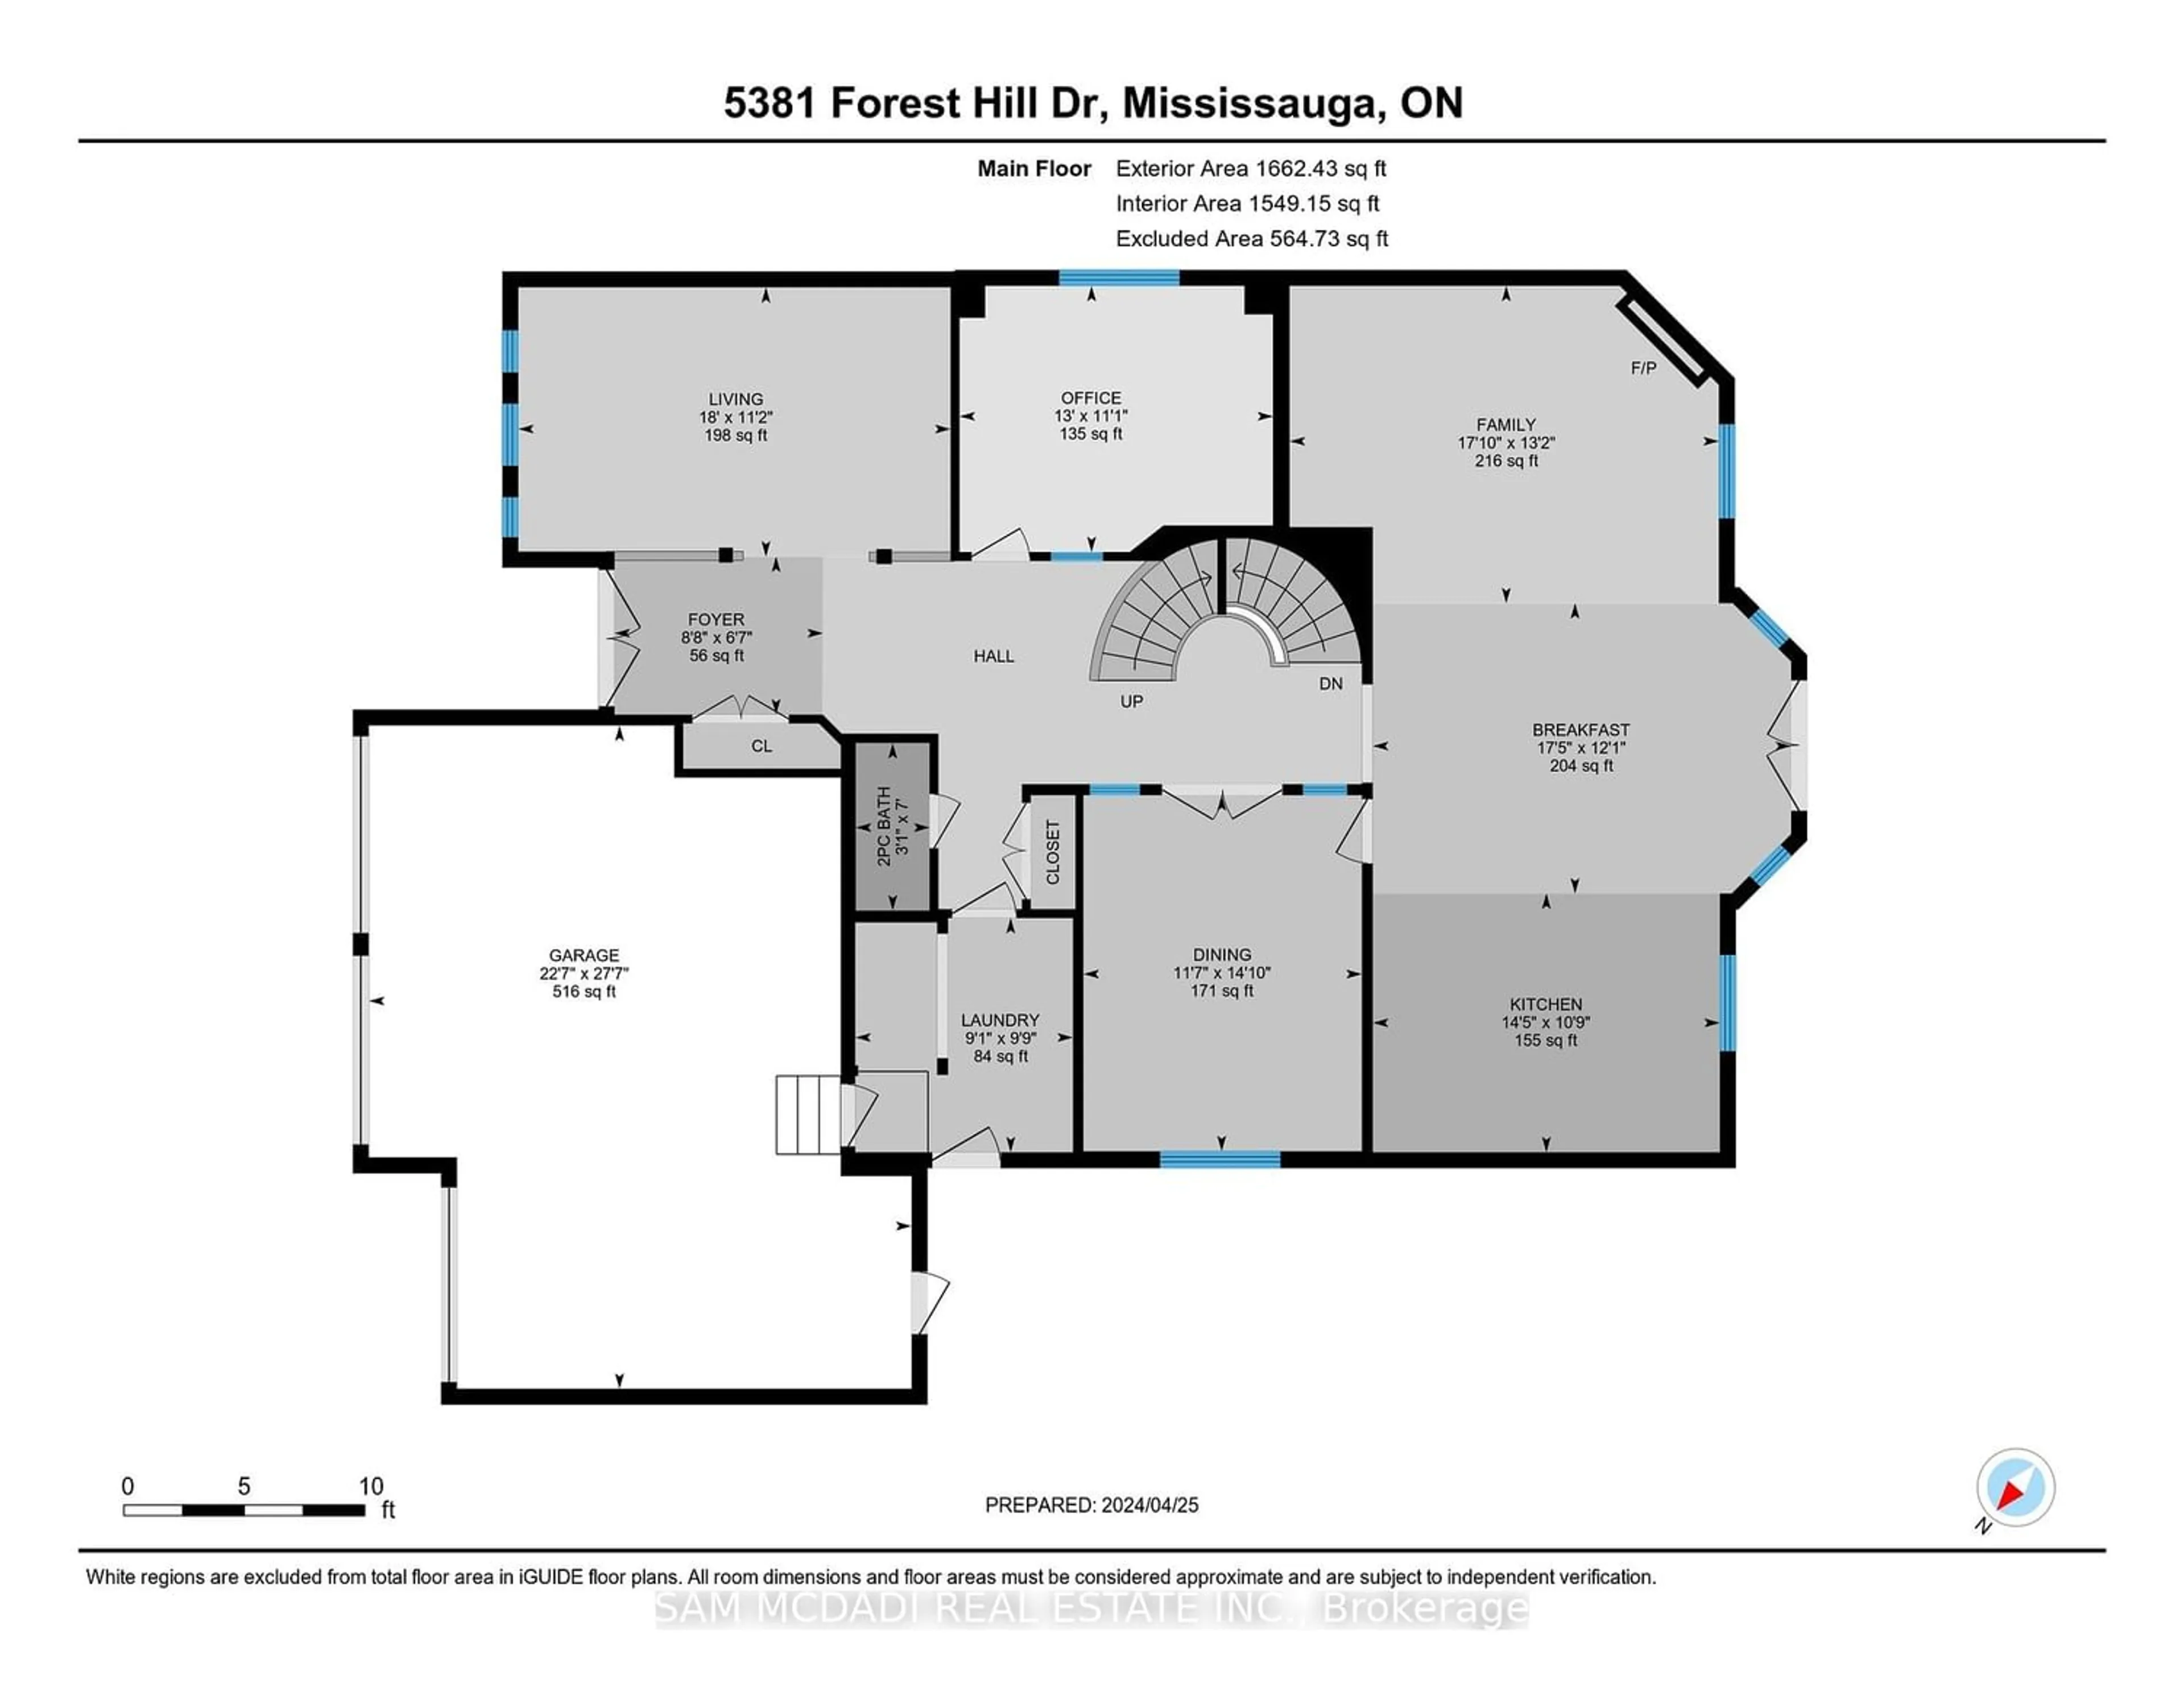 Floor plan for 5381 Forest Hill Dr, Mississauga Ontario L5M 6G9